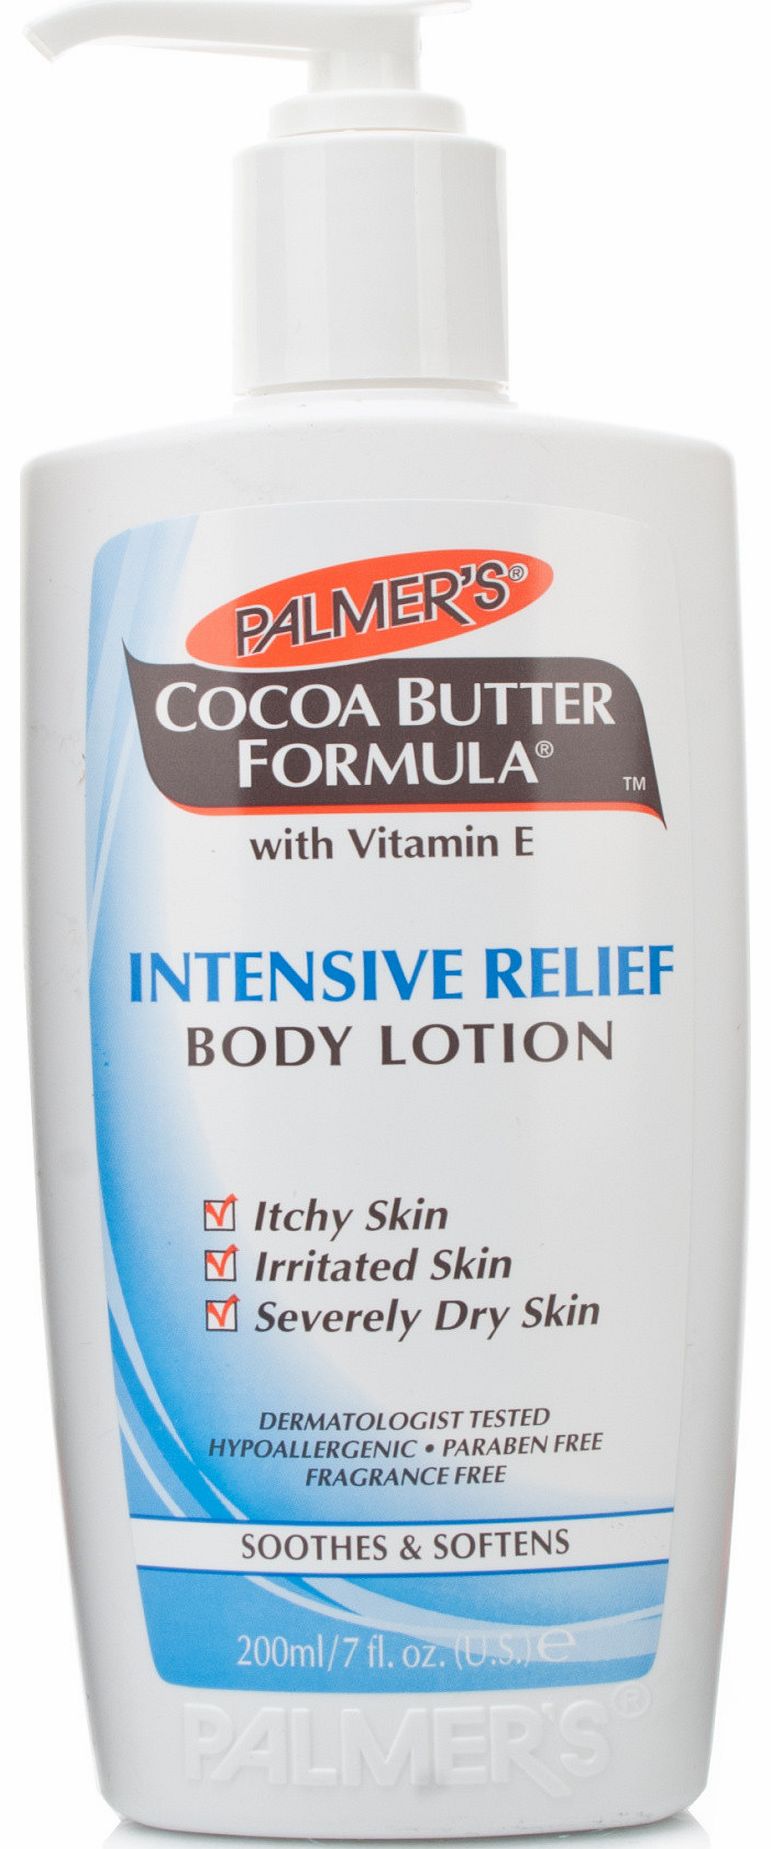 Palmers Intensive Relief Body Lotion